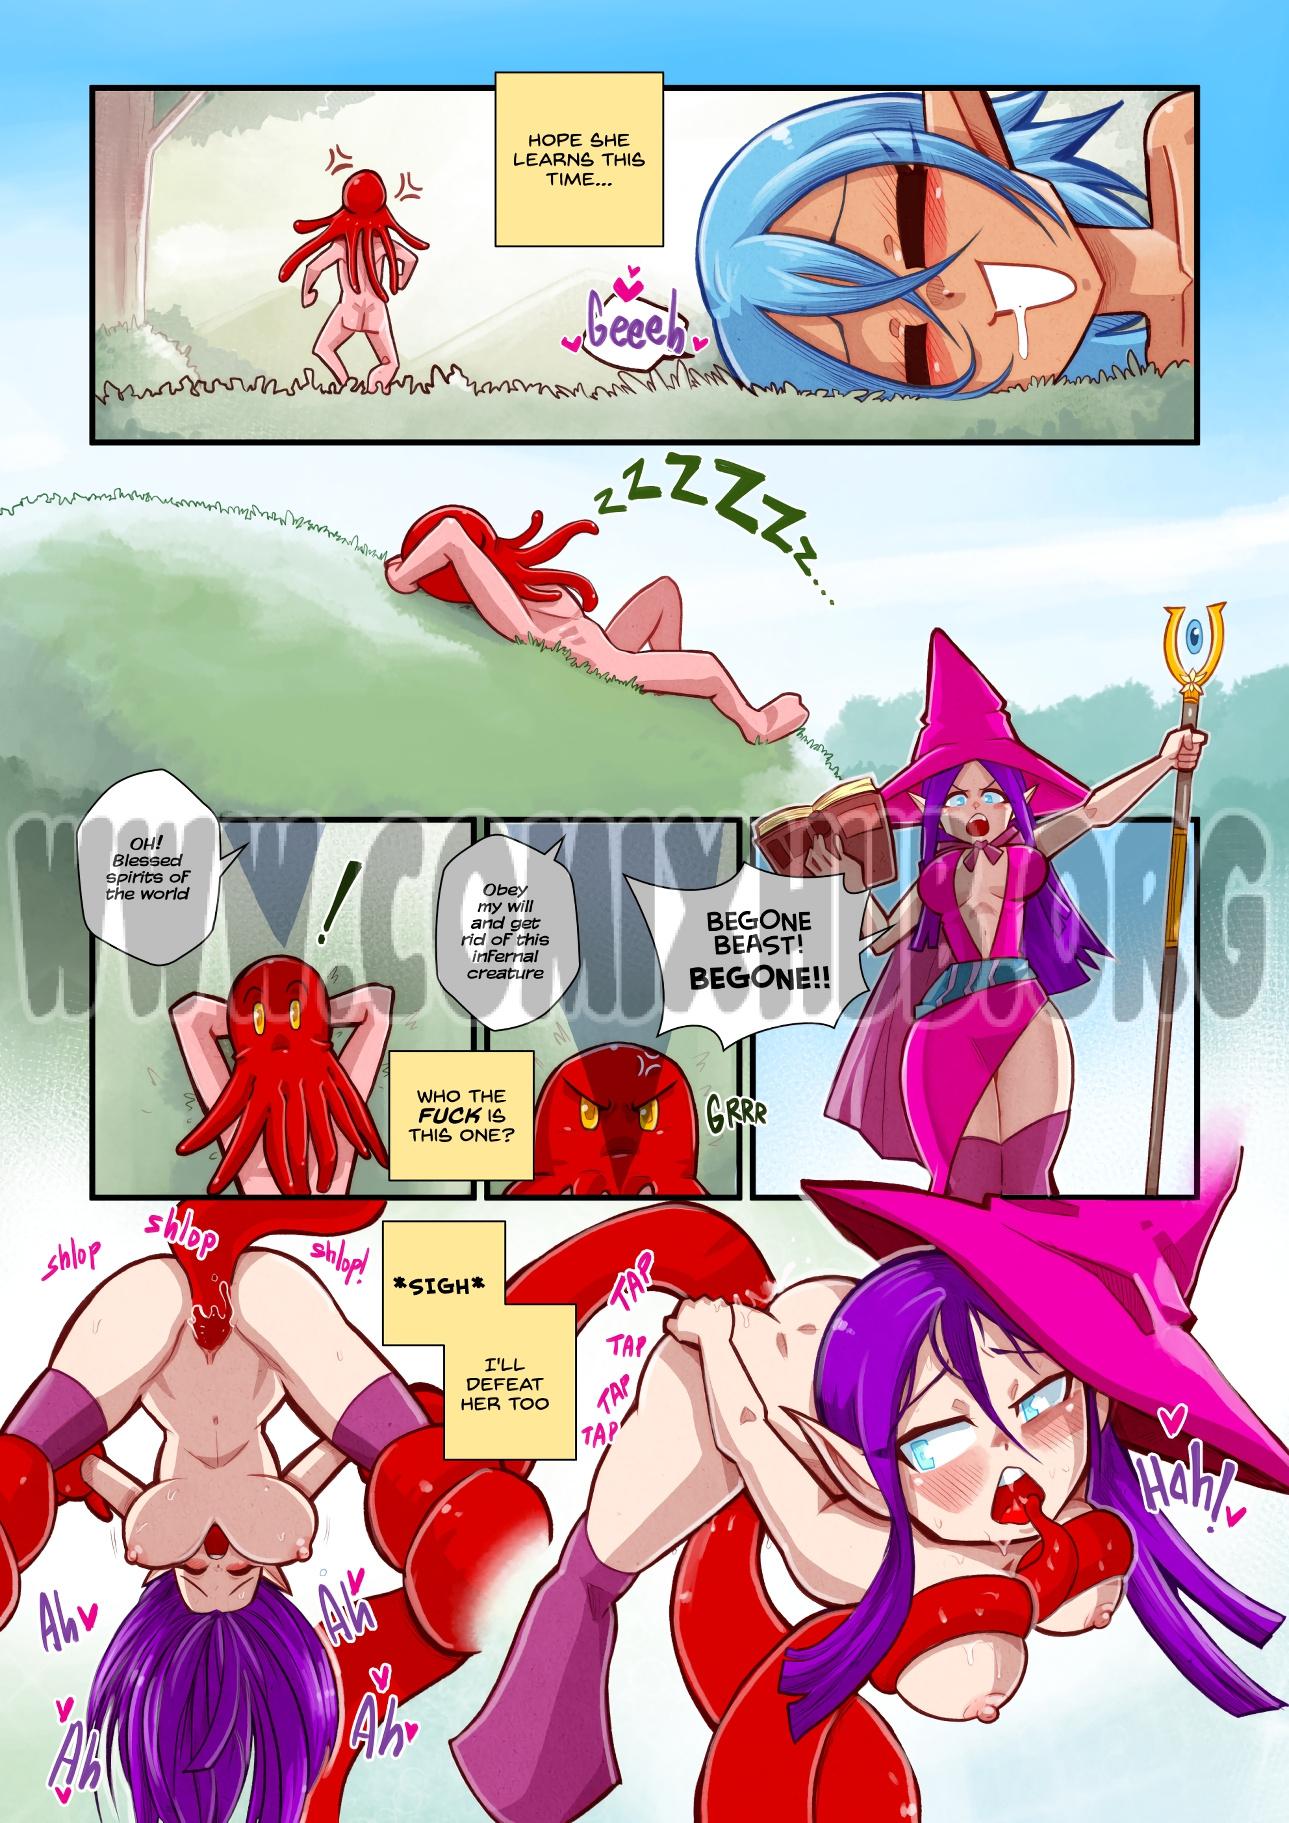 Life as a Tentacle Monster in Another World Oral sex, Anal Sex, Blowjob, Double Penetration, Elf, Fantasy, Furry, Glasses, Group Sex, Monster Girls, Sex and Magic, Stockings, Straight, Tentacles, Titfuck